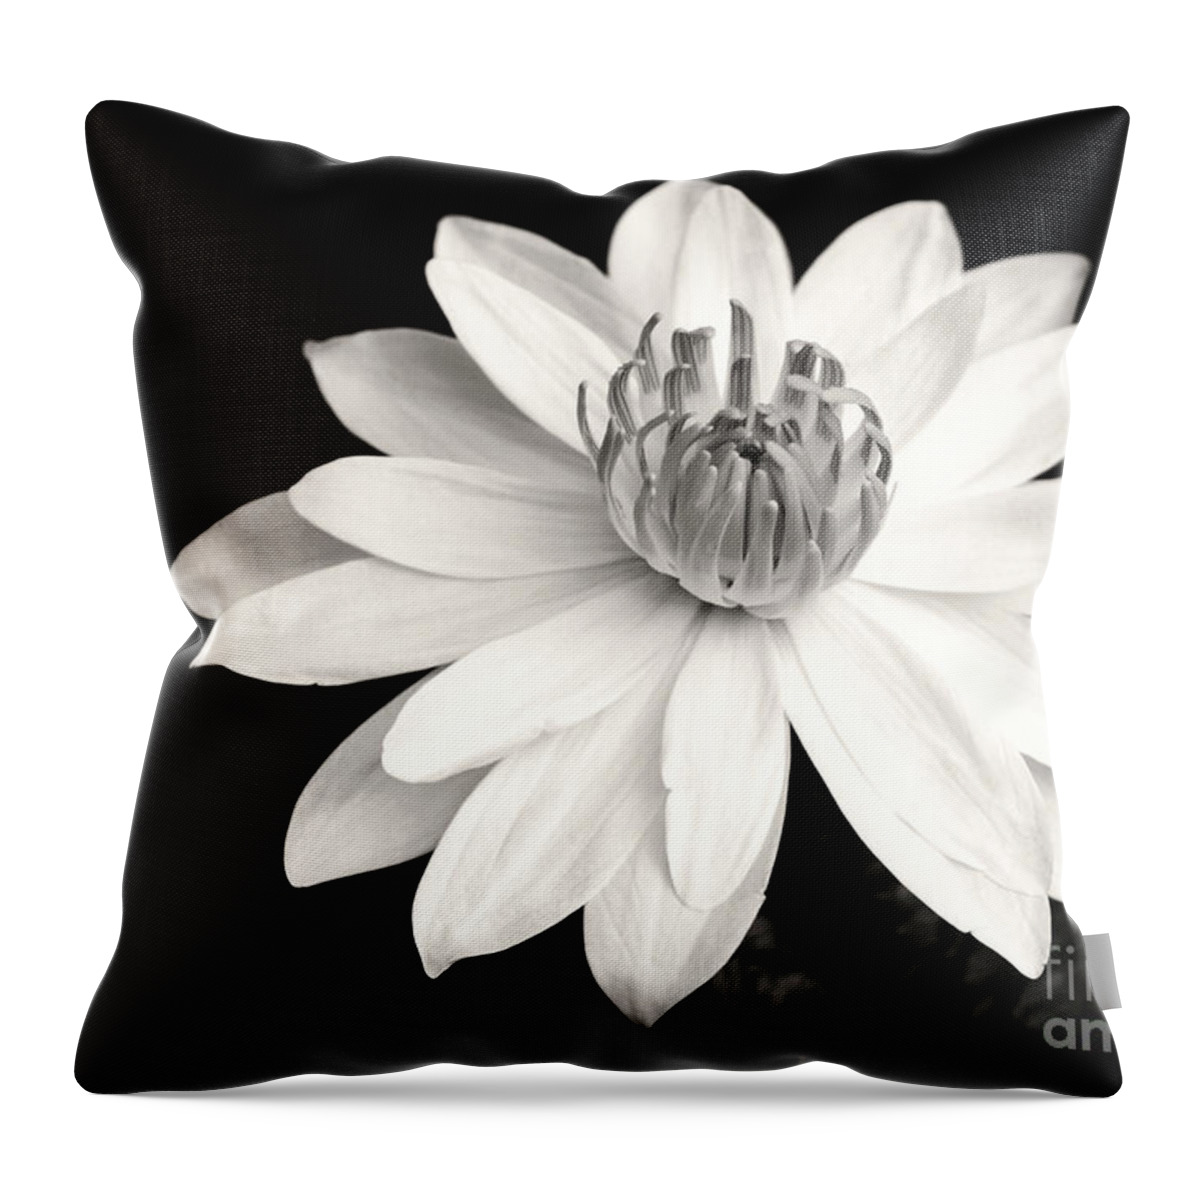 Landscape Throw Pillow featuring the photograph Water Lily Ballerina by Sabrina L Ryan